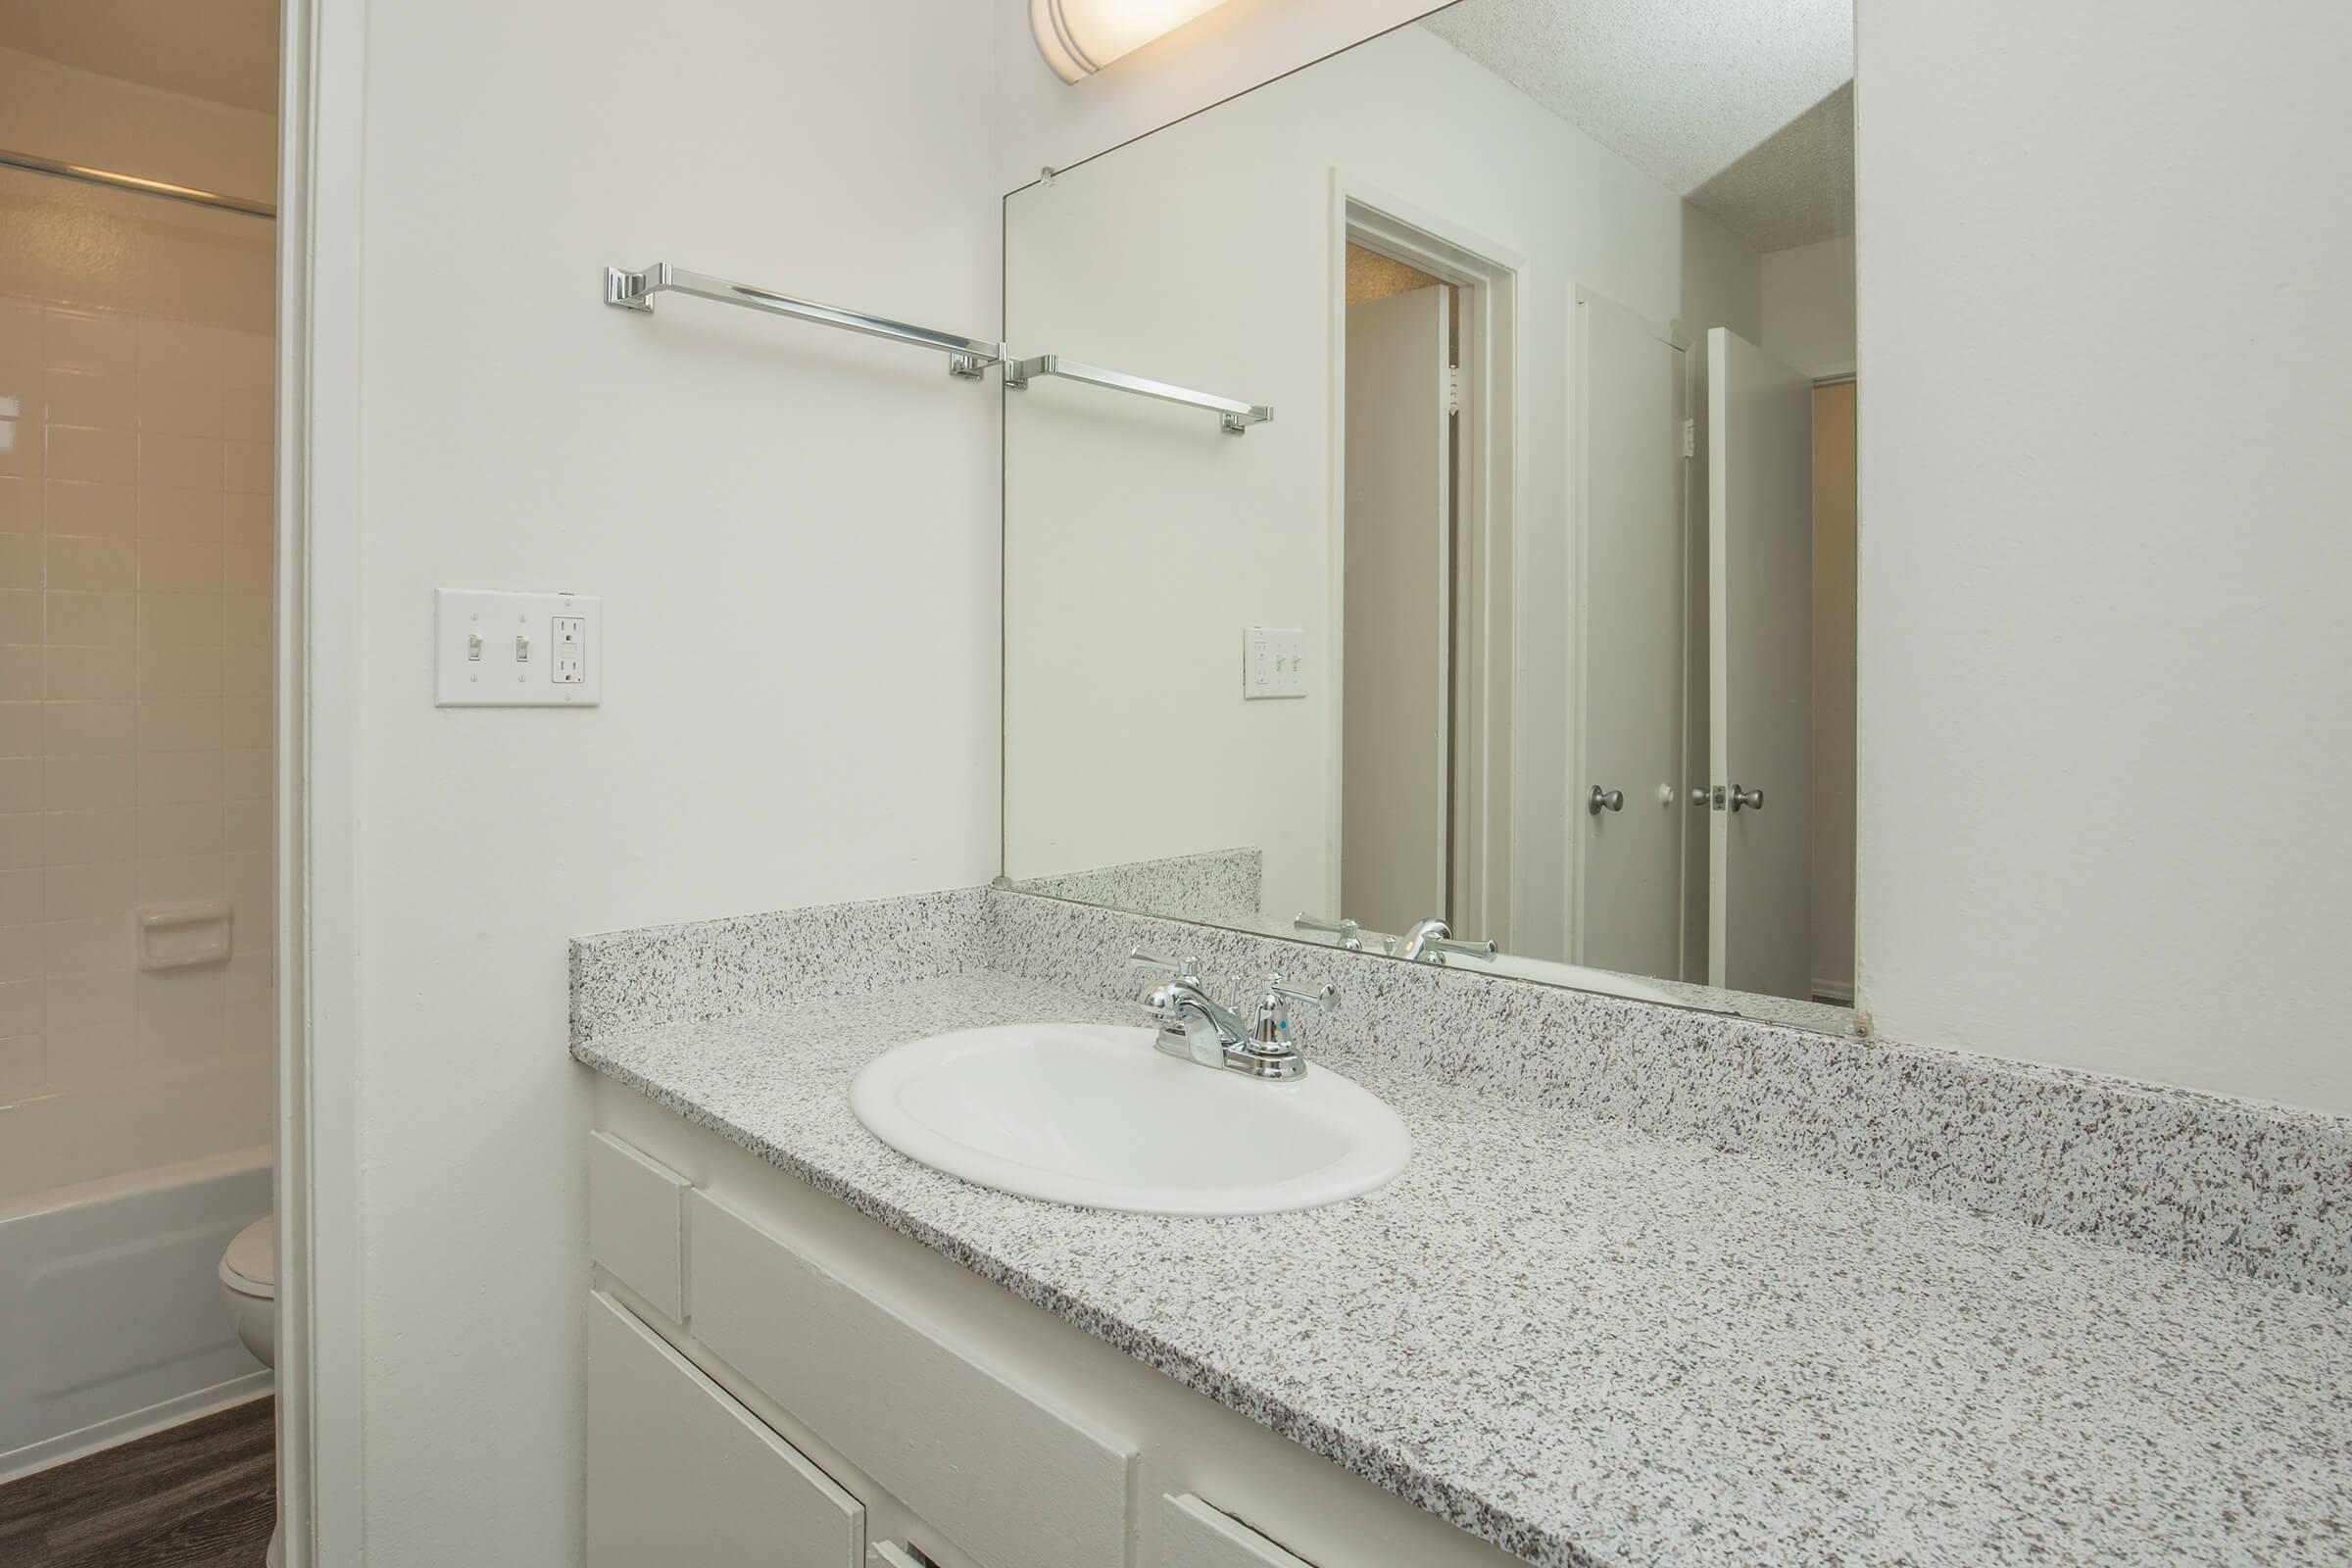 Bathroom sink with white cabinets